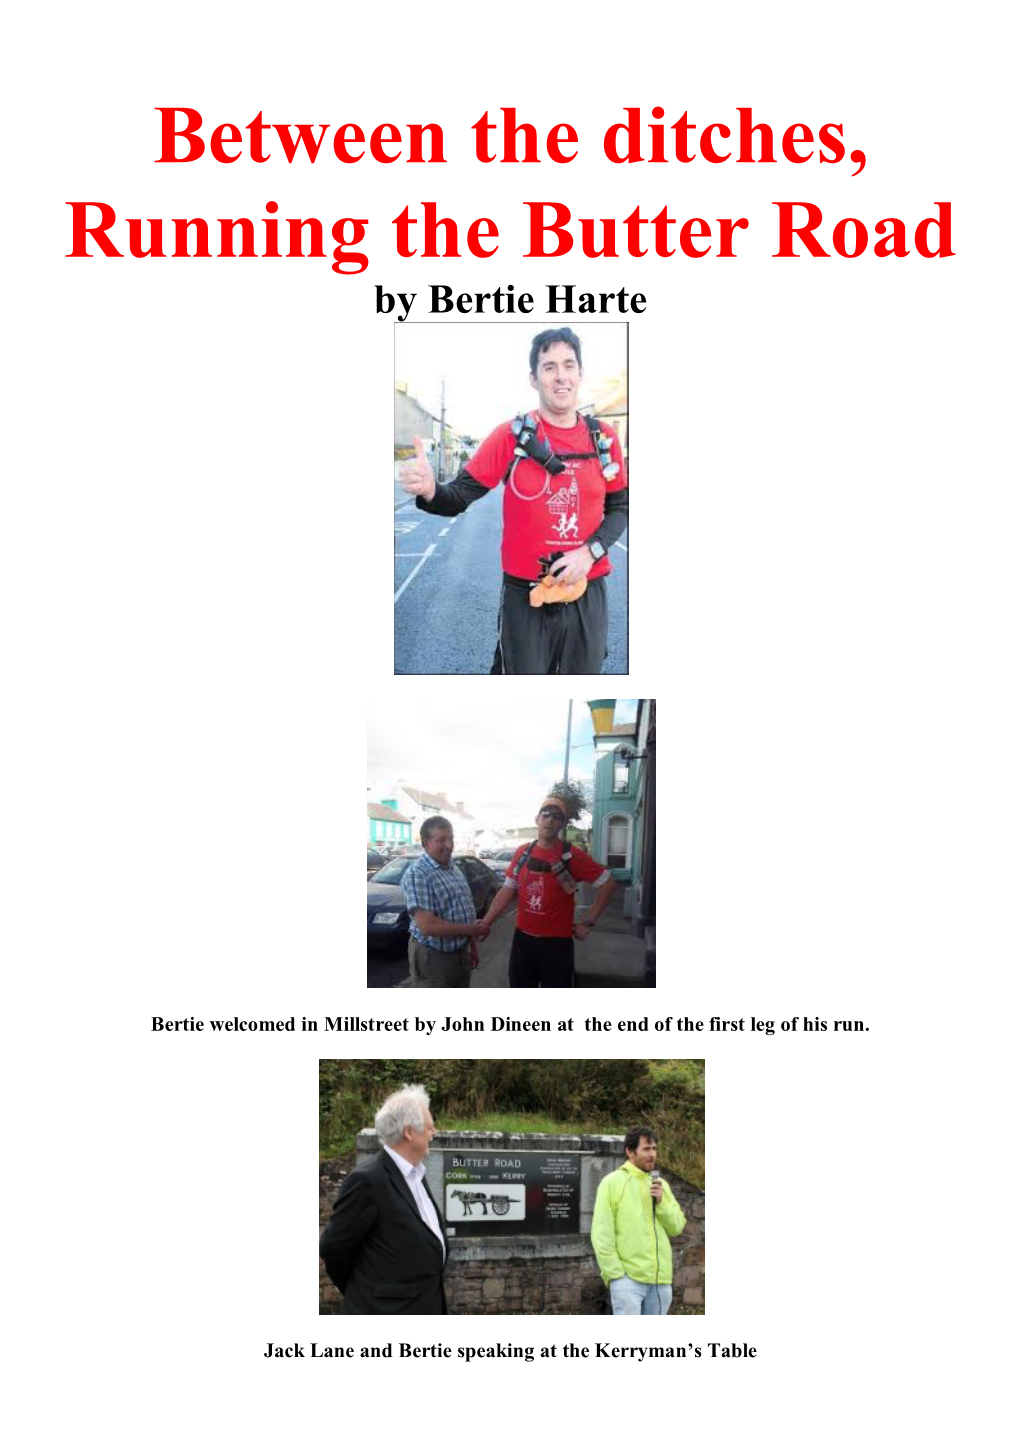 Between the Ditches, Running the Butter Road by Bertie Harte